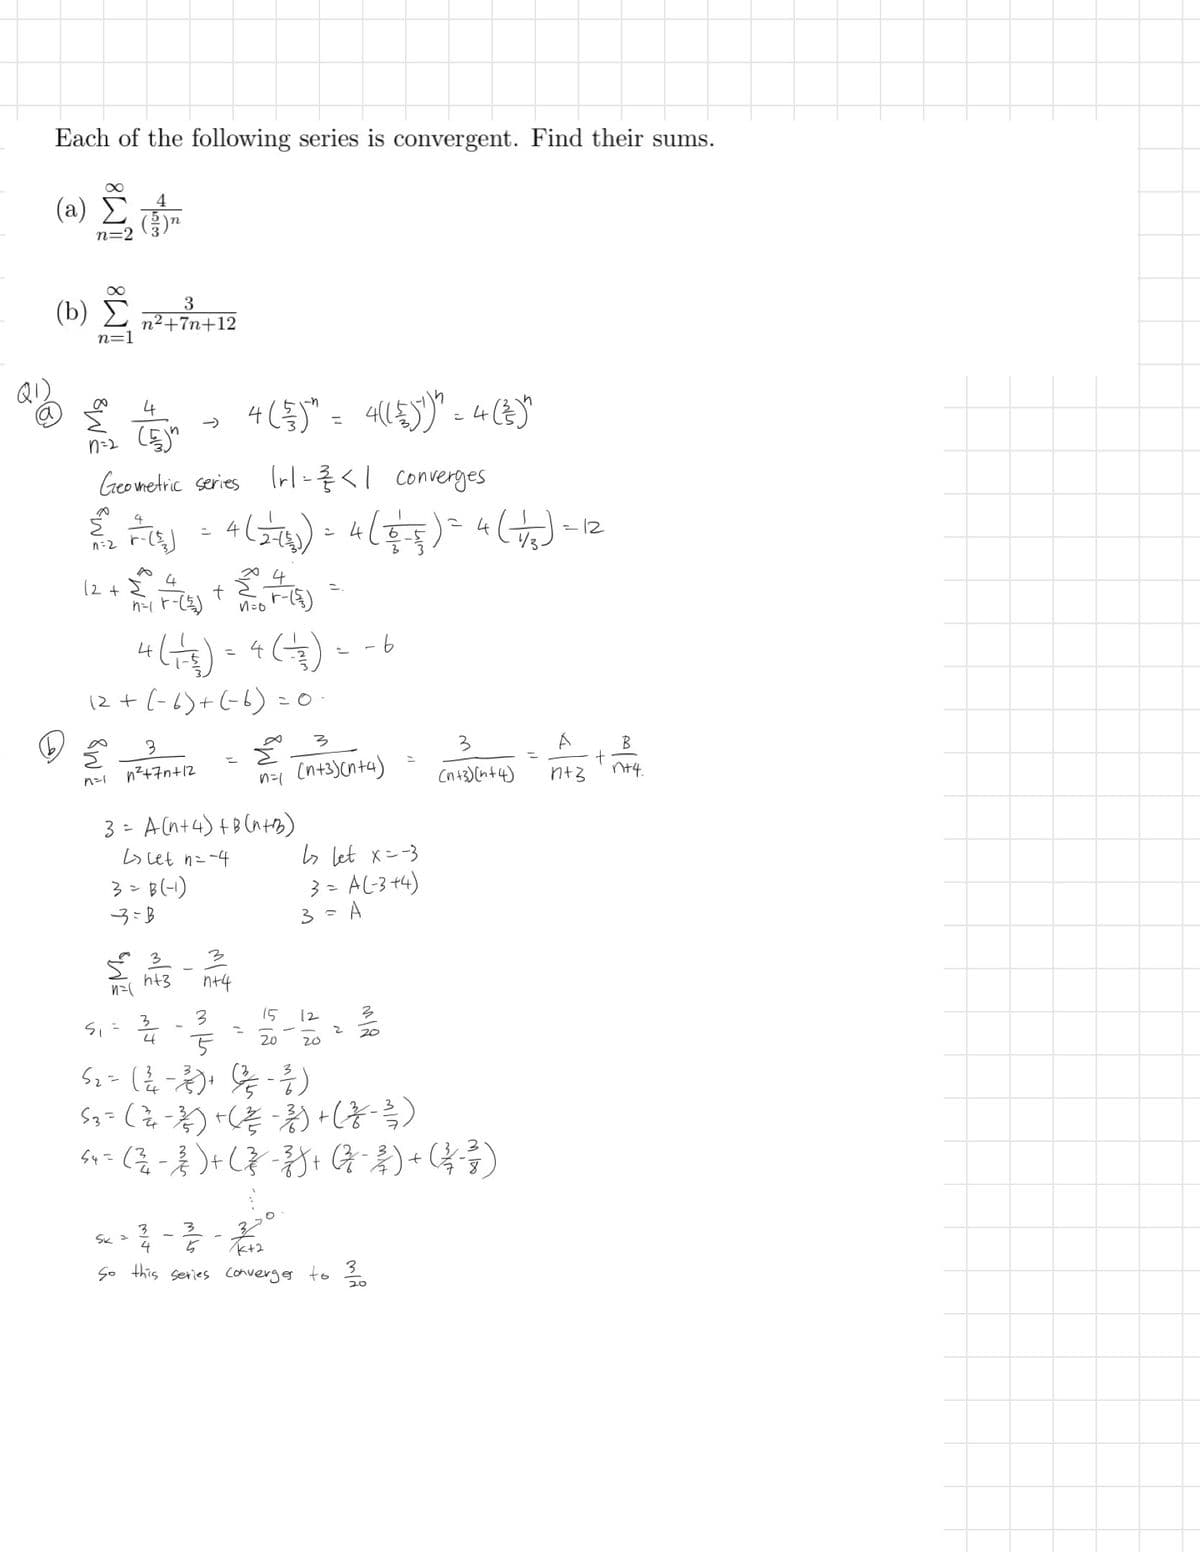 910
Each of the following series is convergent. Find their sums.
(a)
n=2
(b)
n=1
3
n²+7n+12
n=2
(5)"
4 (33) = 4 (())" = 4 (3)"
41号)=4(言
4(号)
Geometric series Irl ====<| converges
है
n=2
༢
2 -(s) = 4 (2-1)) = 4 (4-5) = 4 (1/3) -1
=2
4
12++黒点
4(+) = 4 (1) --6
12+ (-6)+(-6)=0
3
b
n=1
3
52+75+12
टै
3
3
B
n=1 (n+3)(n+4)
+
(n+3)(n+4)
1+3
n+4.
3= A(n+4)+B (n+b)
L>Let n=-4
3=B(-1)
3-B
↳ Let x=-3
3=A(-3+4)
n=
S=
h+3
3
लग
4
-
一
3
n+4
5
52 = ( 2/4 - 2) +
15
512
20
3 = A
층)
5% -동)
12
20
له
2
लात
53 = ( 4 − 3 ) + ( ²² - 3) + (z - 3/3)
54 = ( ²² - } } ) + ( } } } ) + ( − 2 ) + ( 3 3 3 )
3
3
SK =
4
TK+2
So this series converges to 30
20